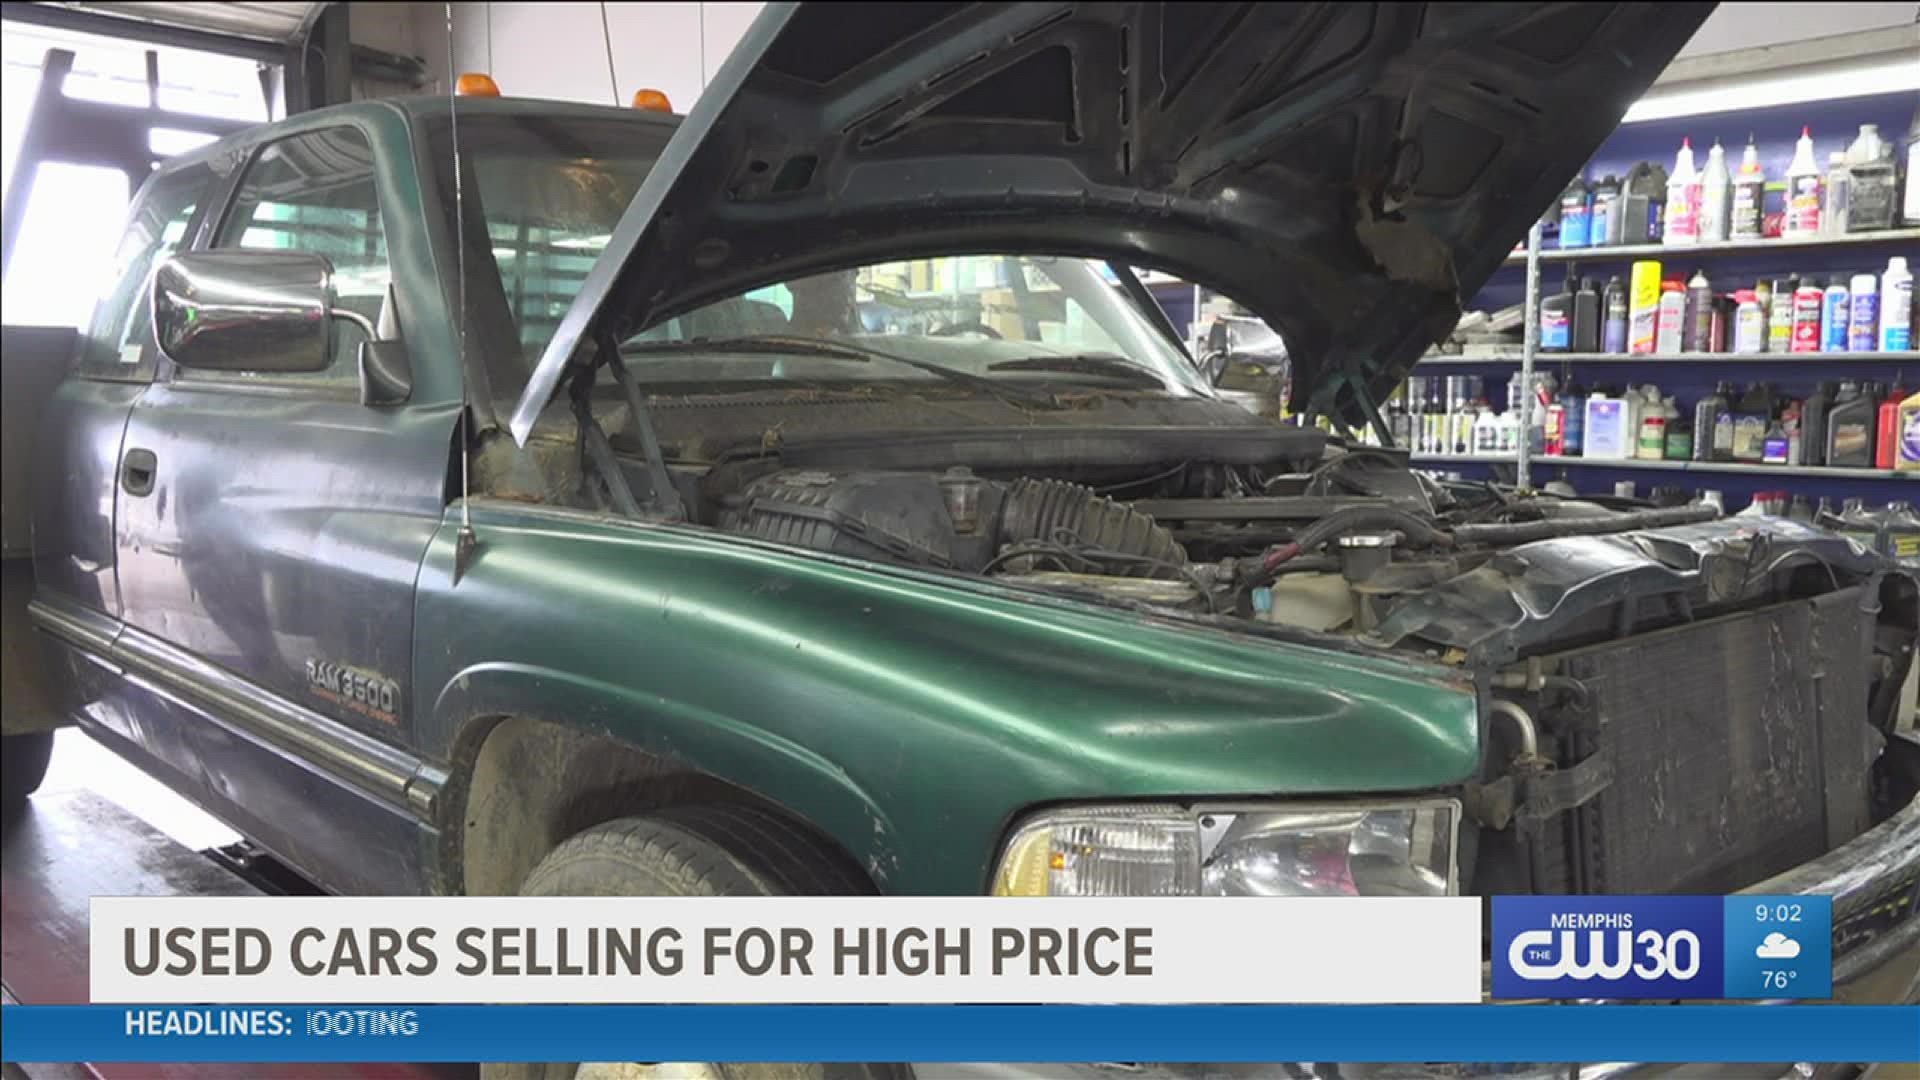 If you're thinking about selling your car, here's why this may be a good time.